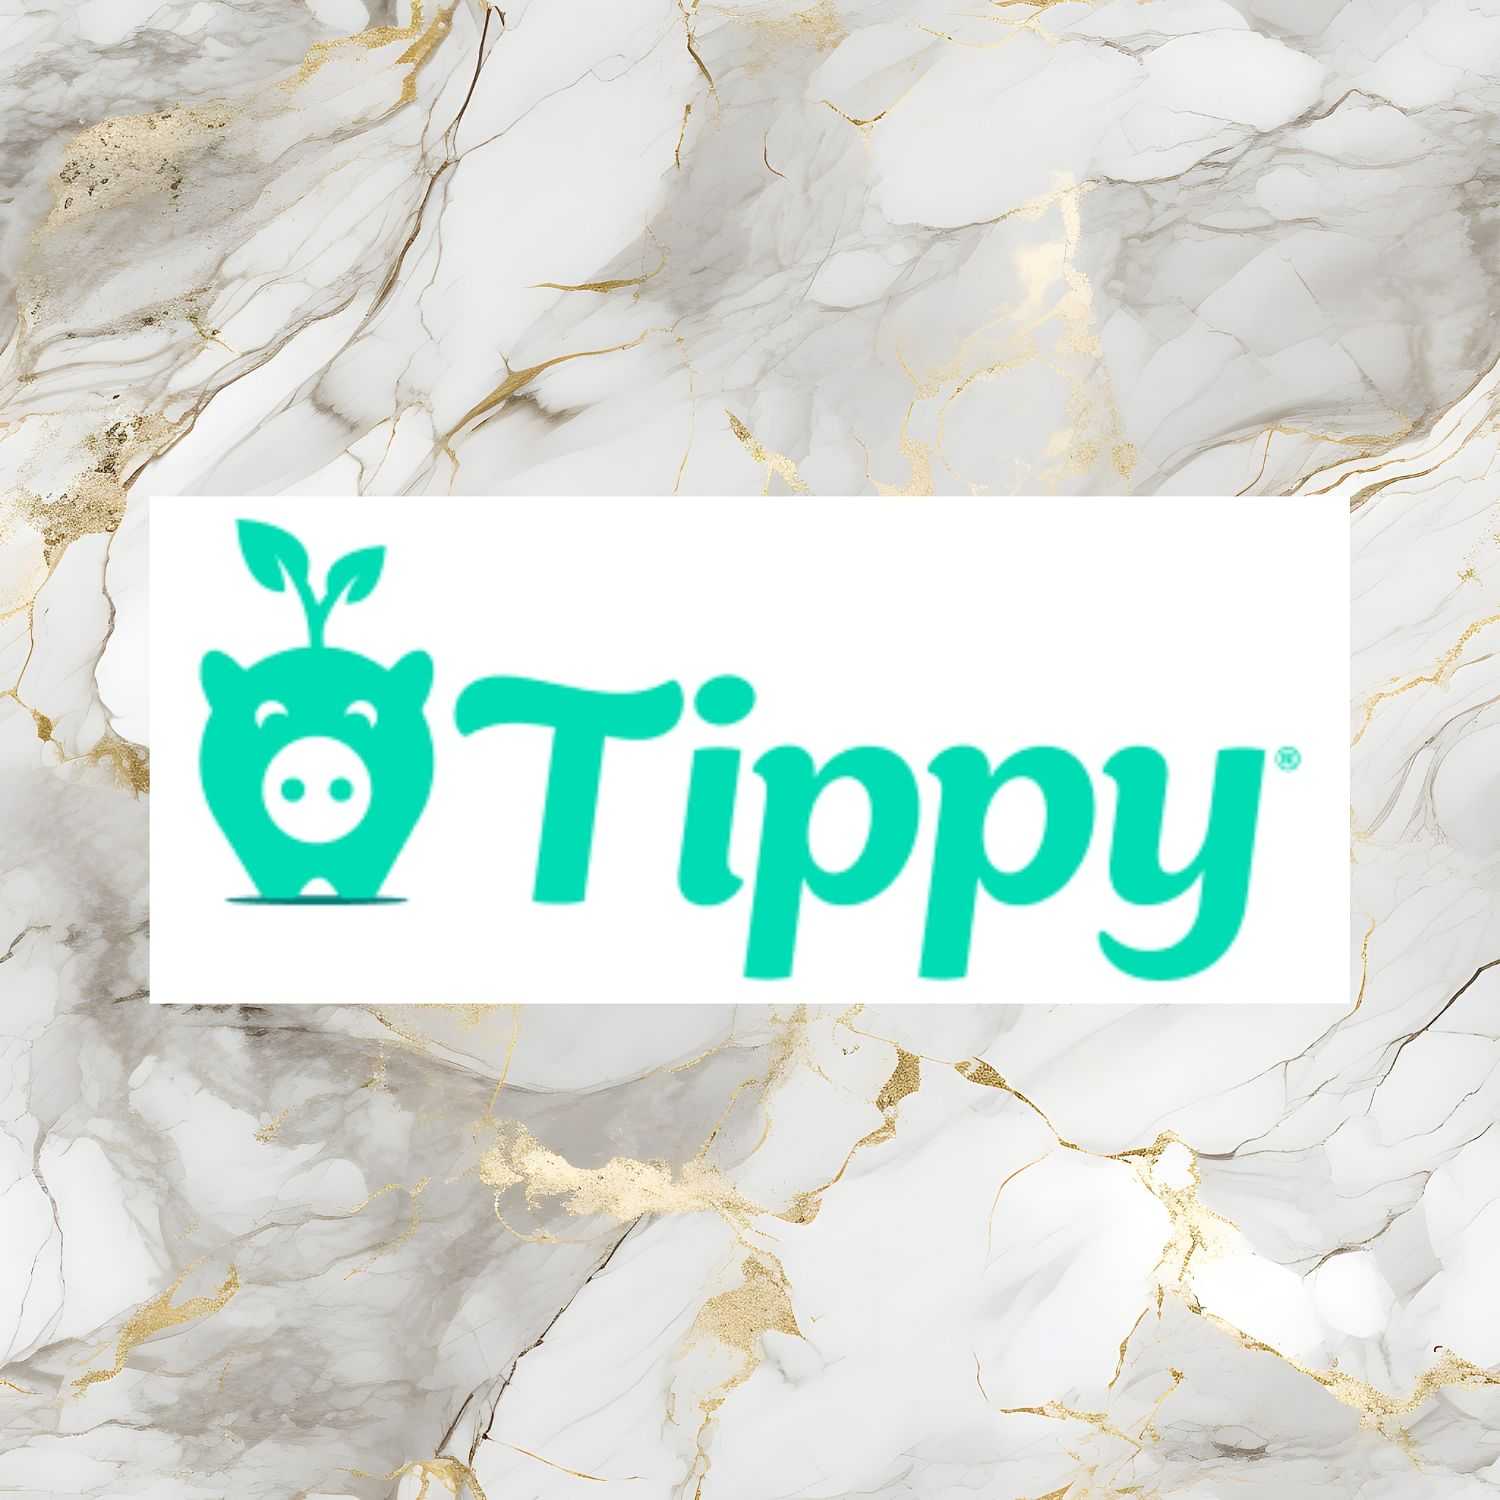 Logo of "Tippy" with a piggy bank and plant design on a marble background.